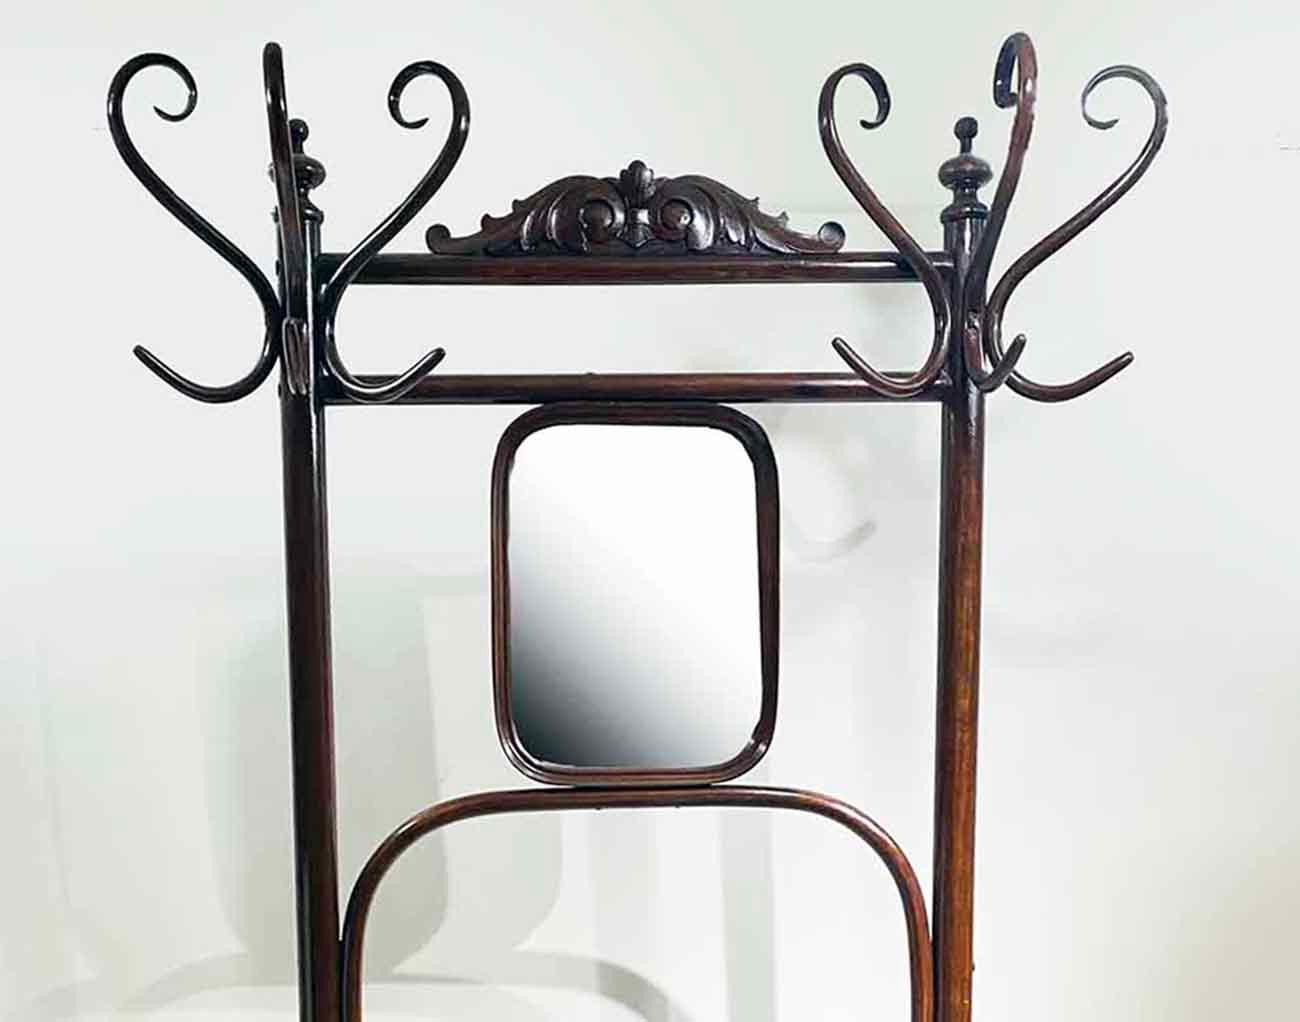 This Classic Thonet style hat and coat rack is made of beautifully finished bentwood. 
Each stand features three top bentwood hooks with a mirror in the middle.
This piece would be a nice decorative addition to an entry, dressing room, mudroom or